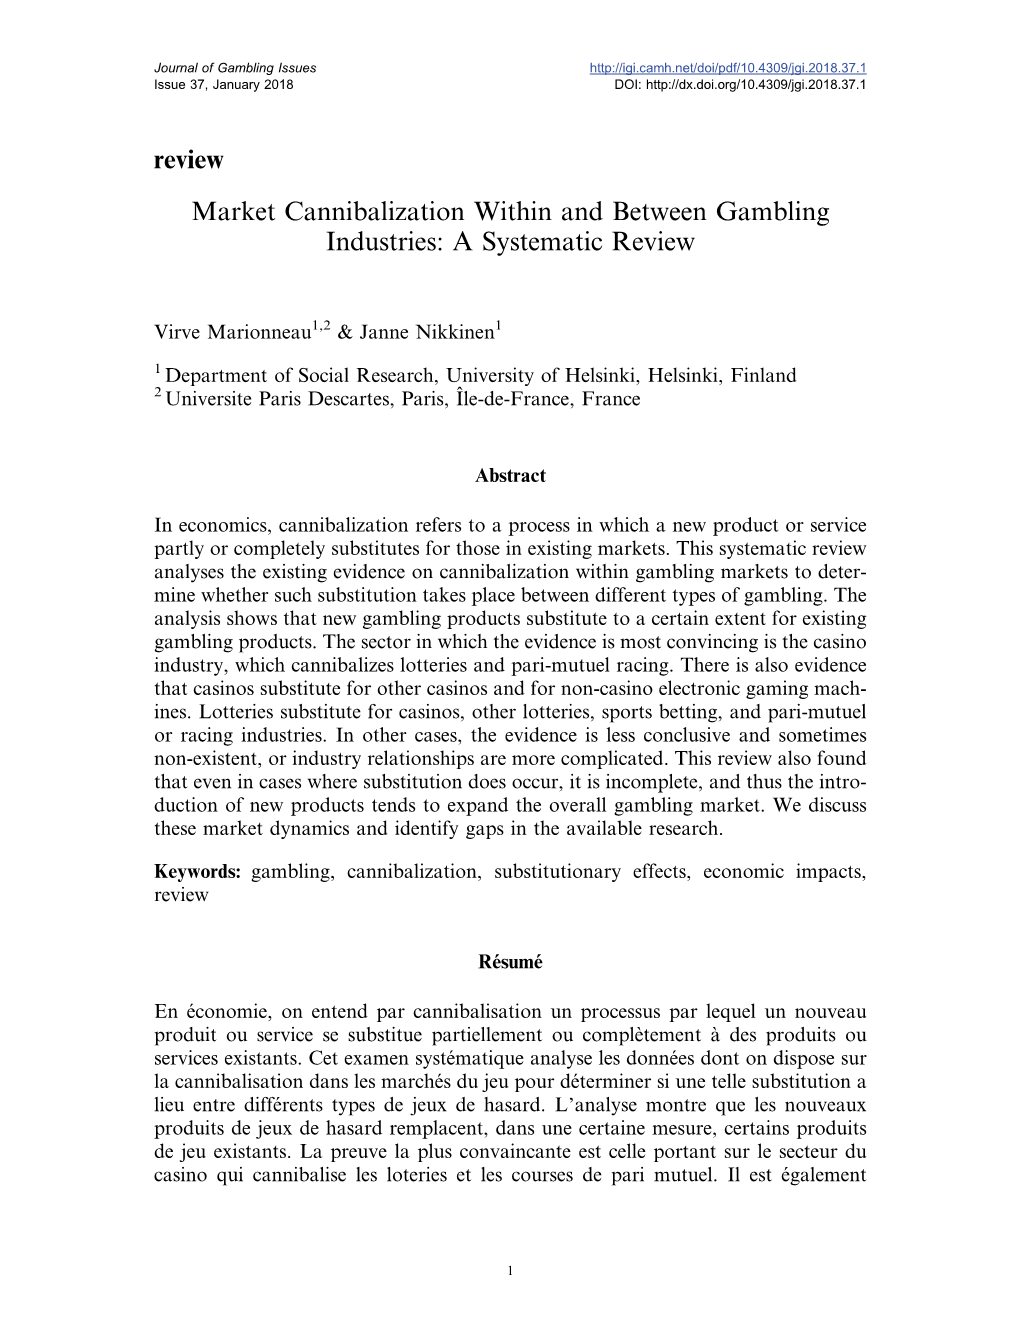 Review Market Cannibalization Within and Between Gambling Industries: a Systematic Review